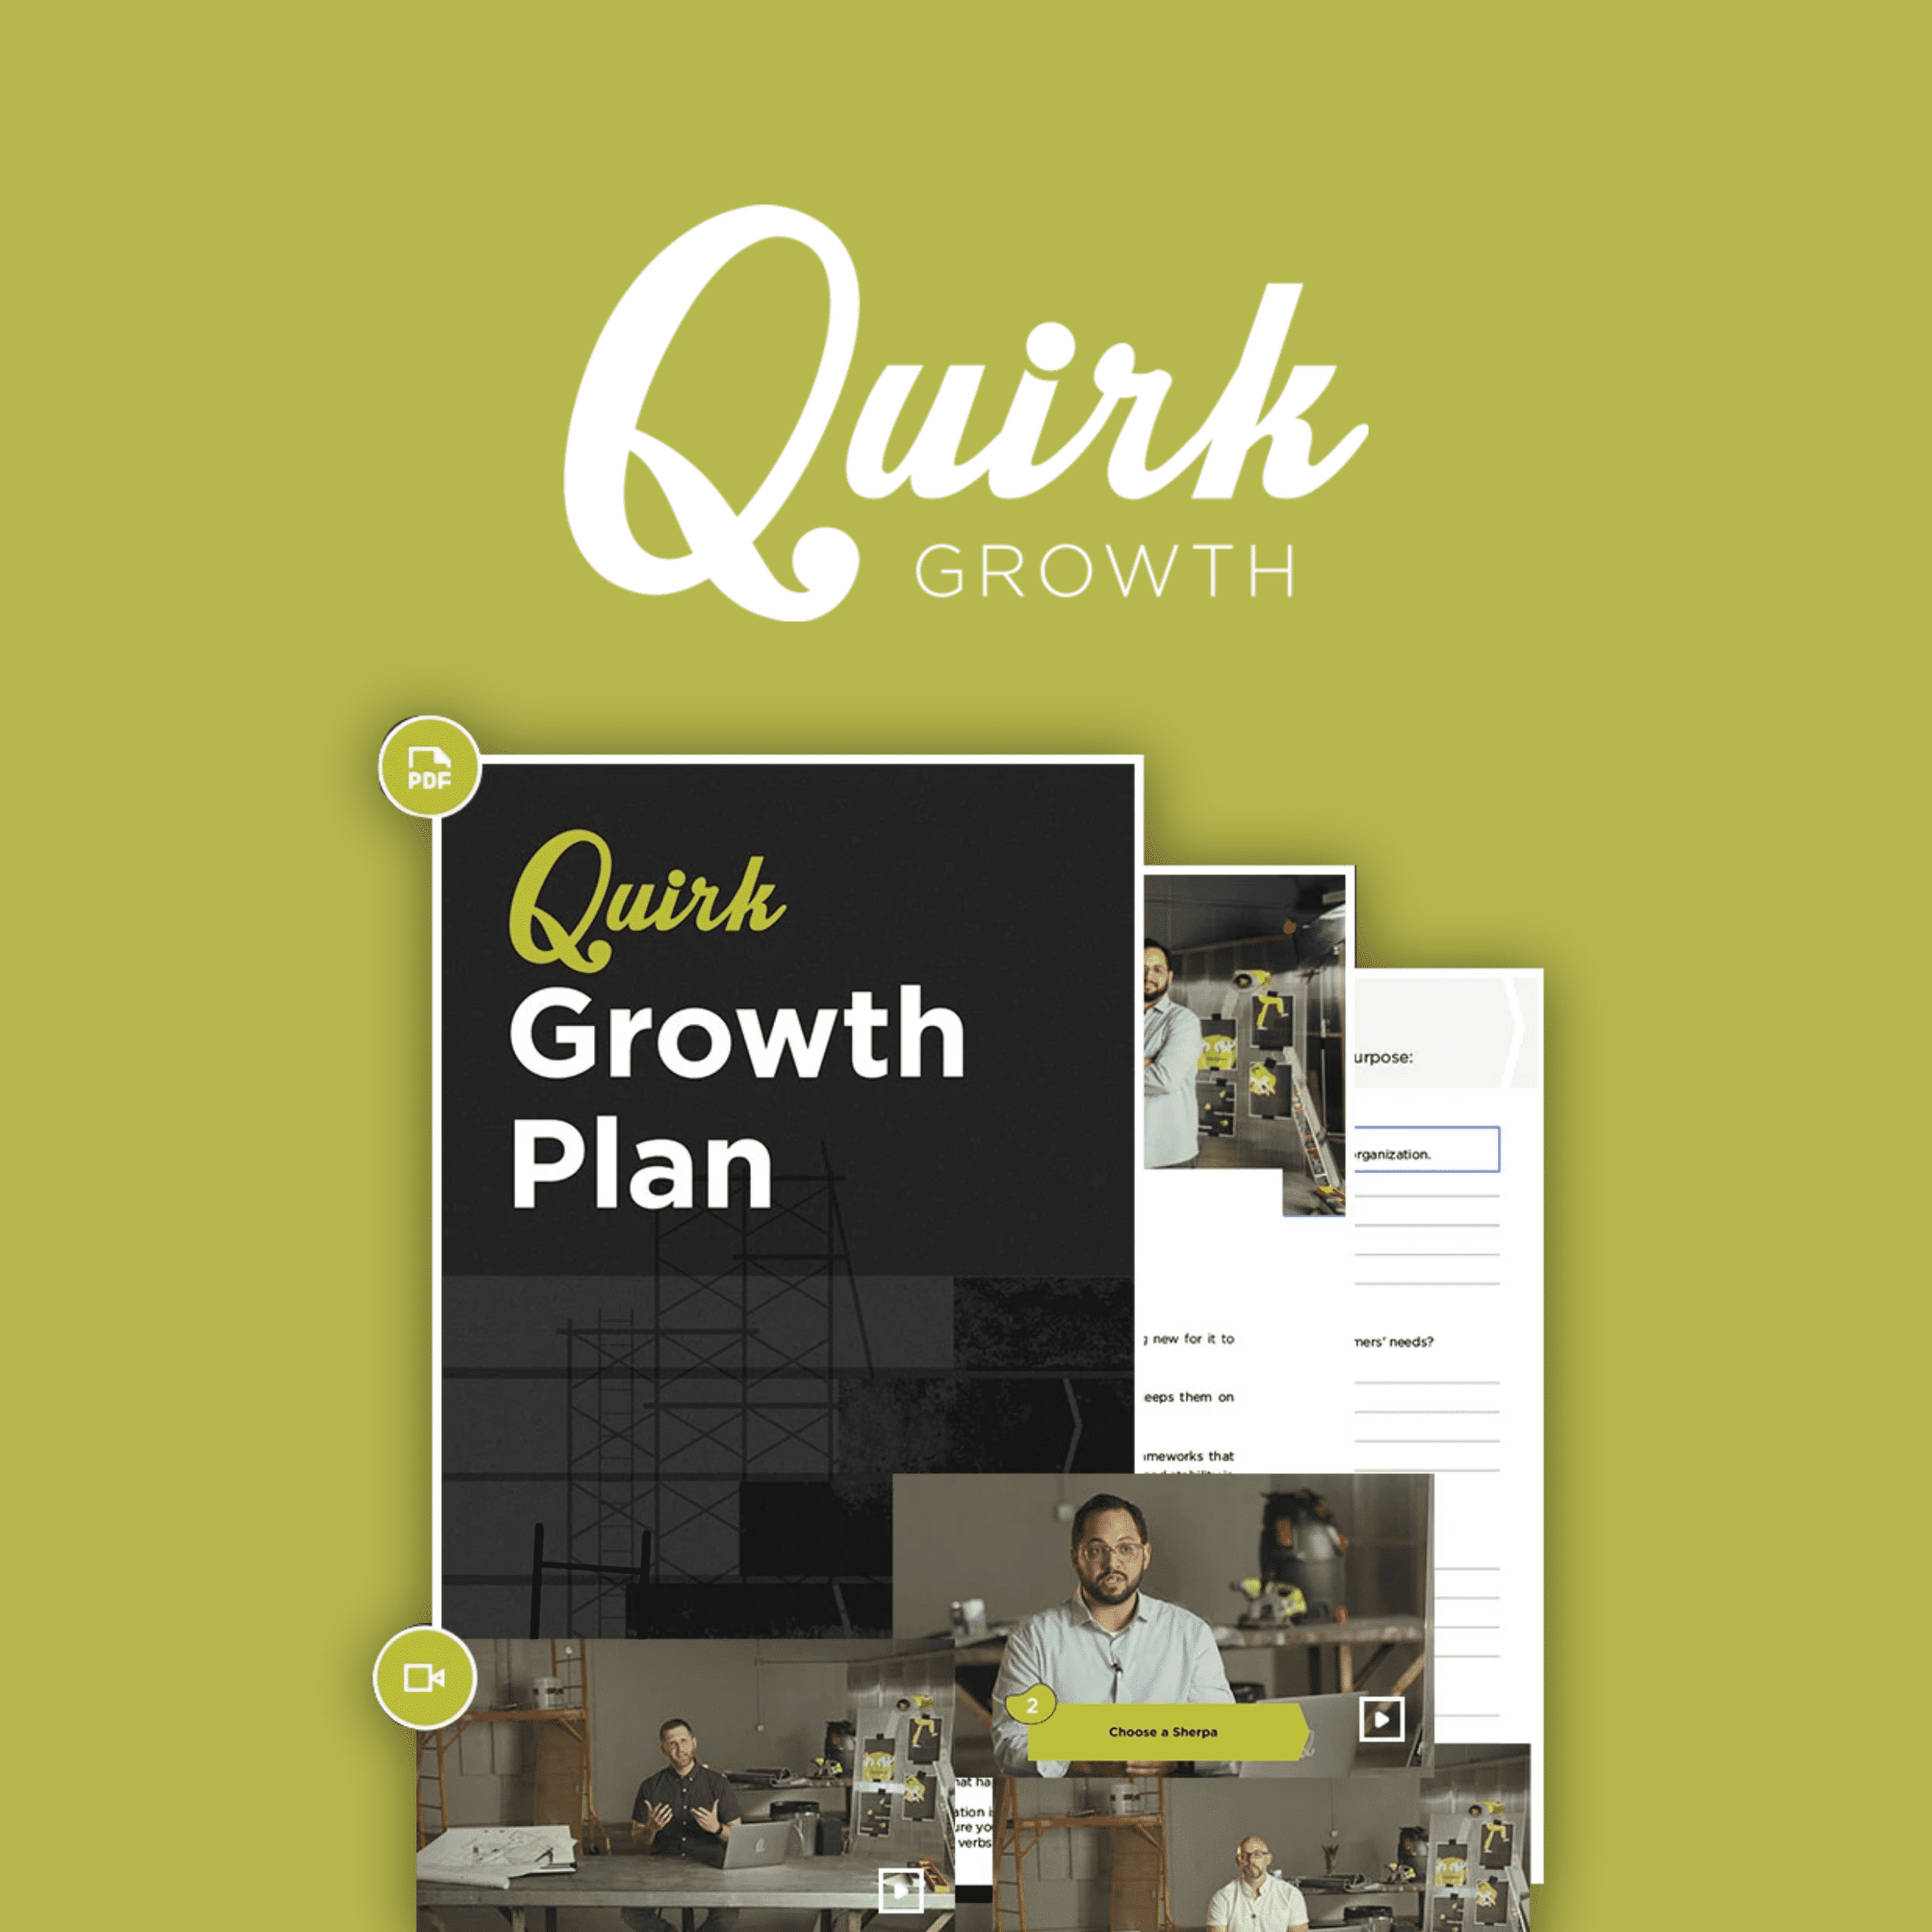 Lifetime access to Quirk Growth Plan